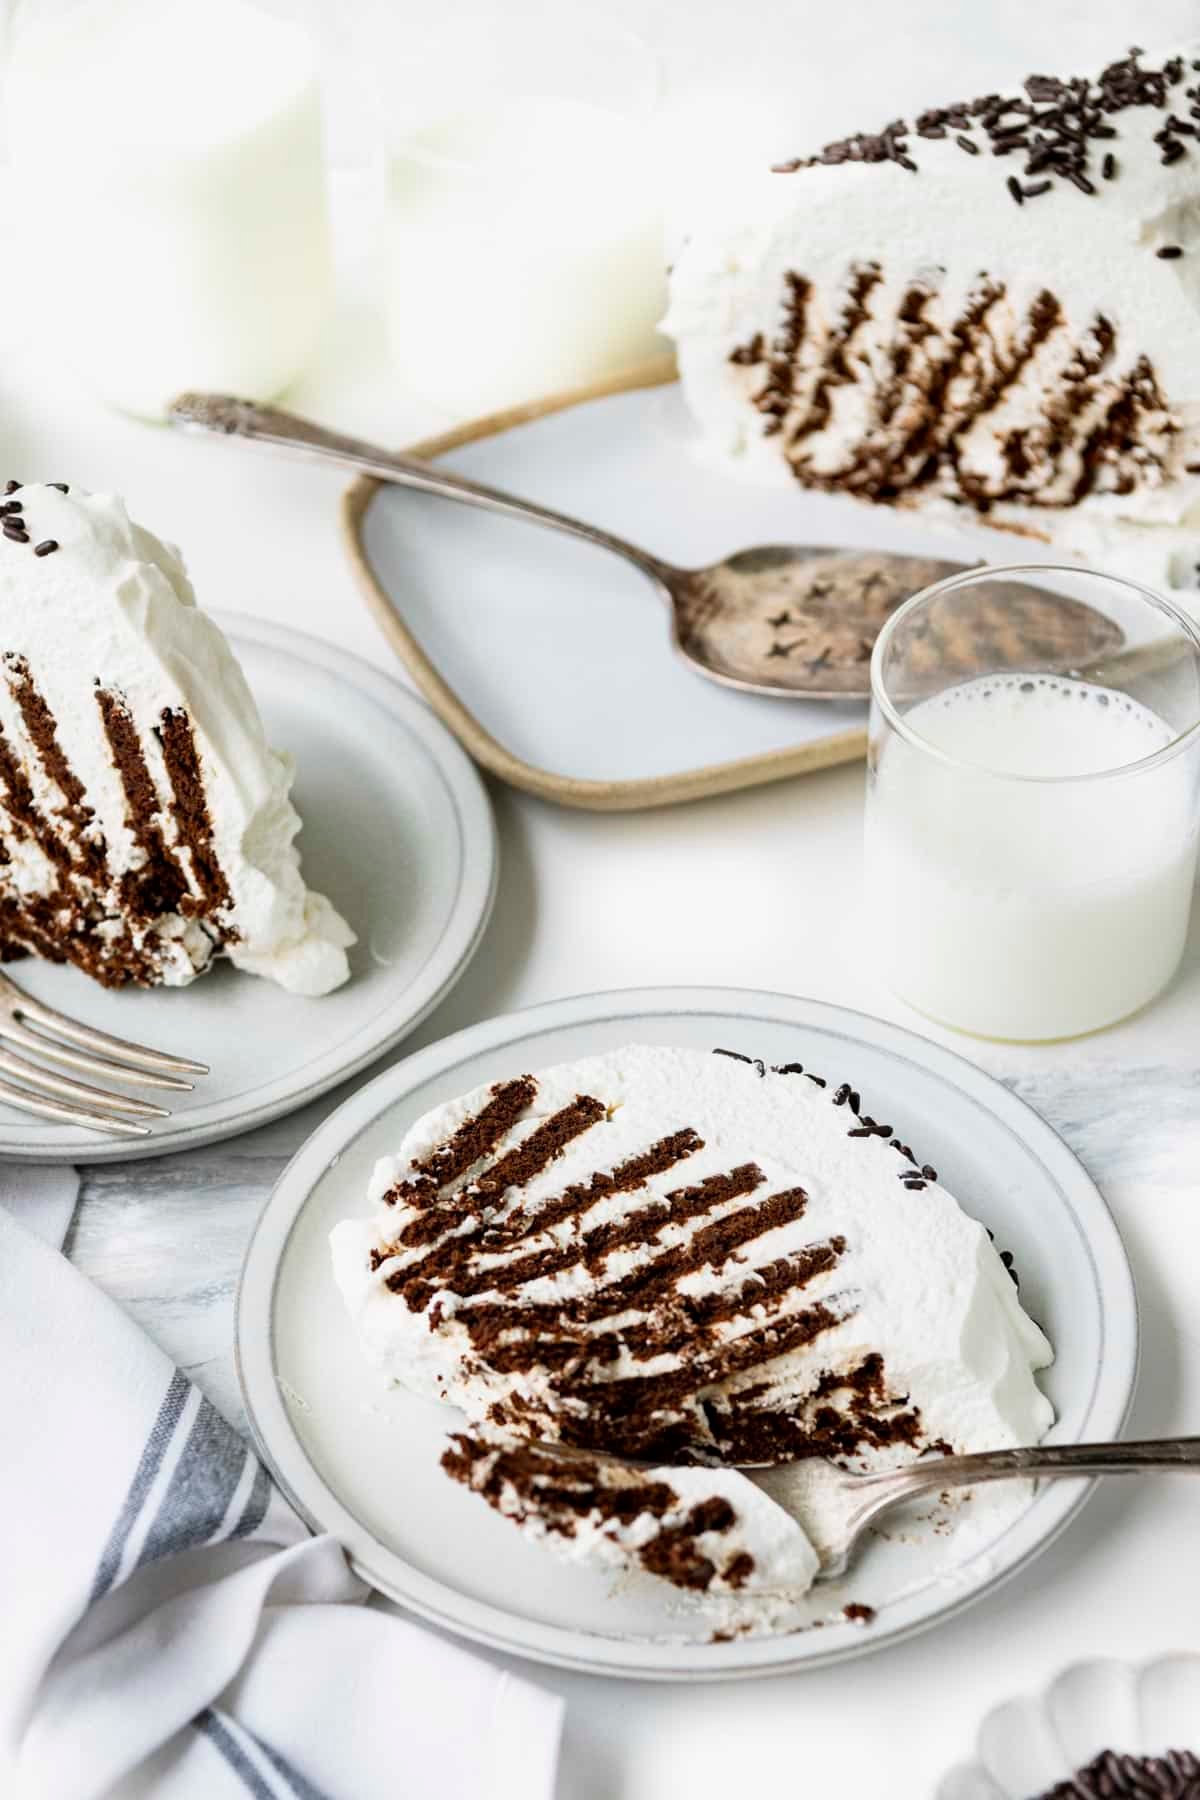 Slice of icebox cake on a white plate on a marble table.